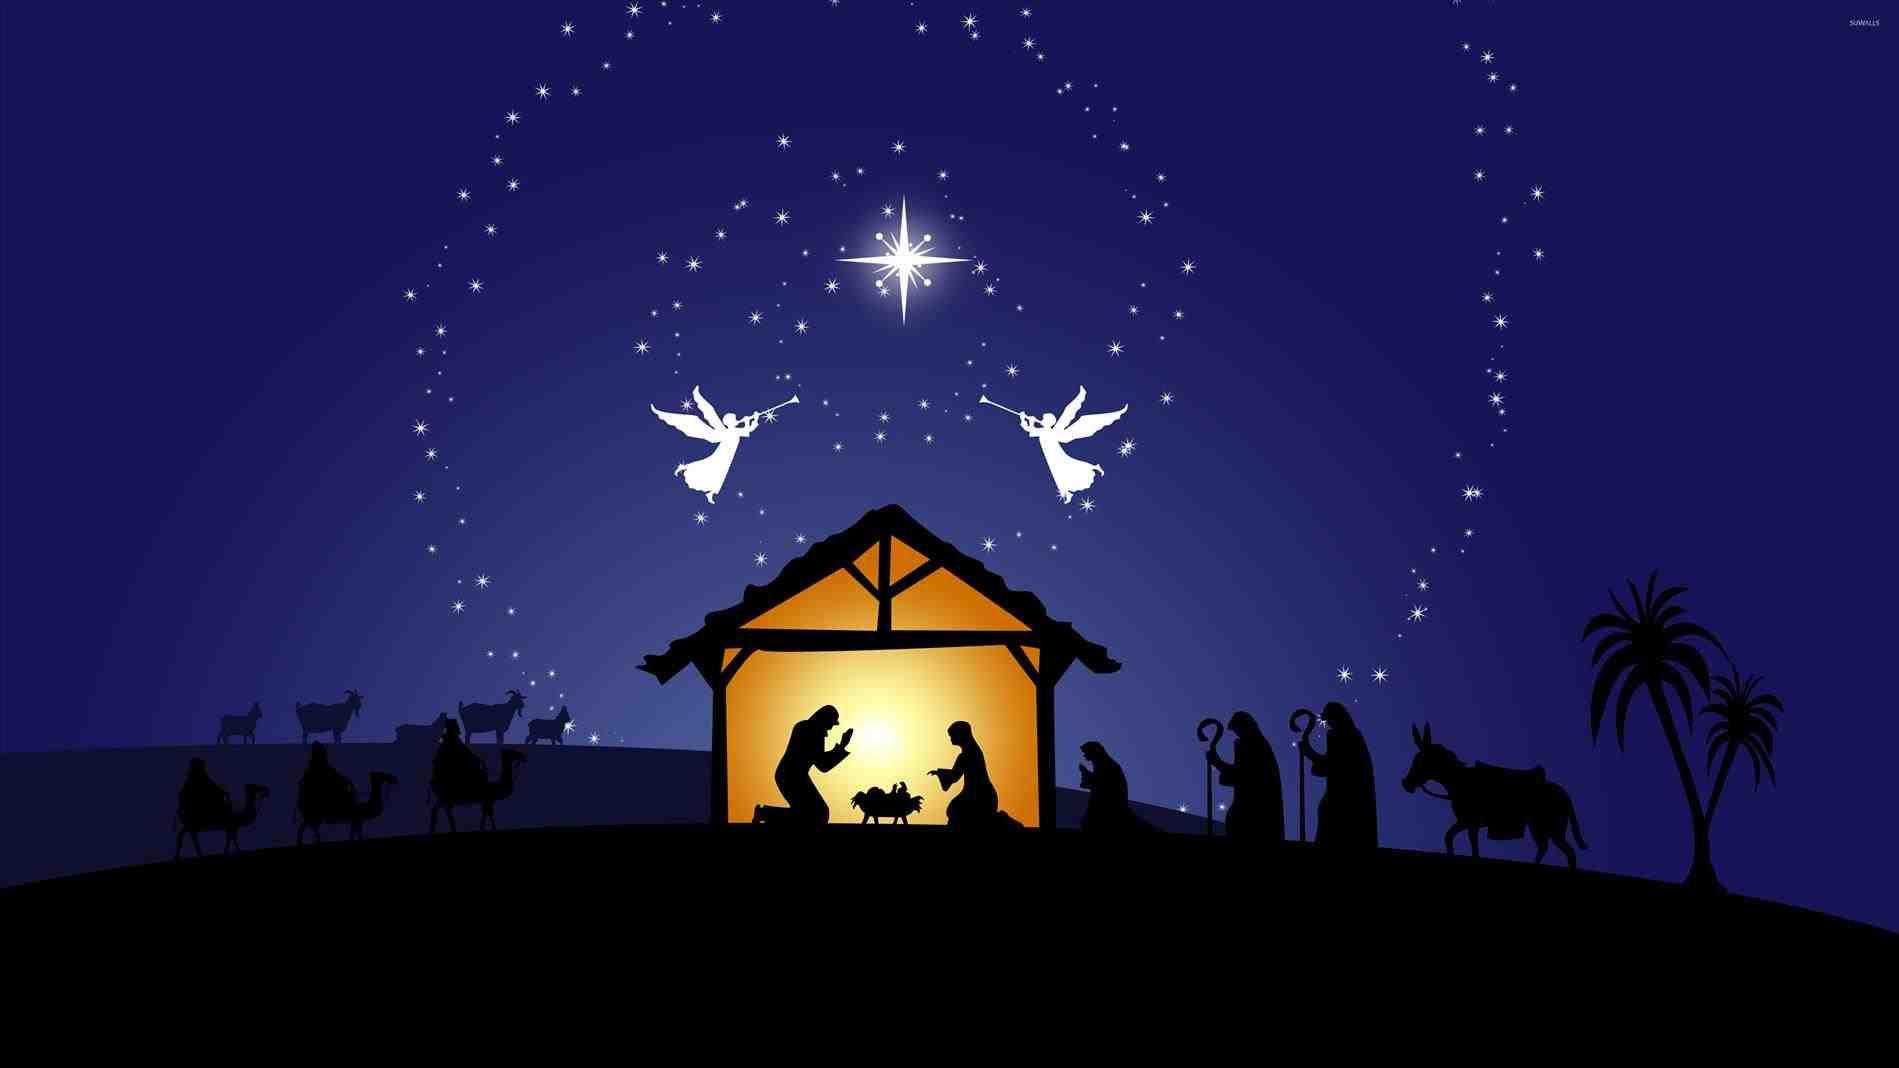 Merry Christmas Nativity Background. how to set these image as